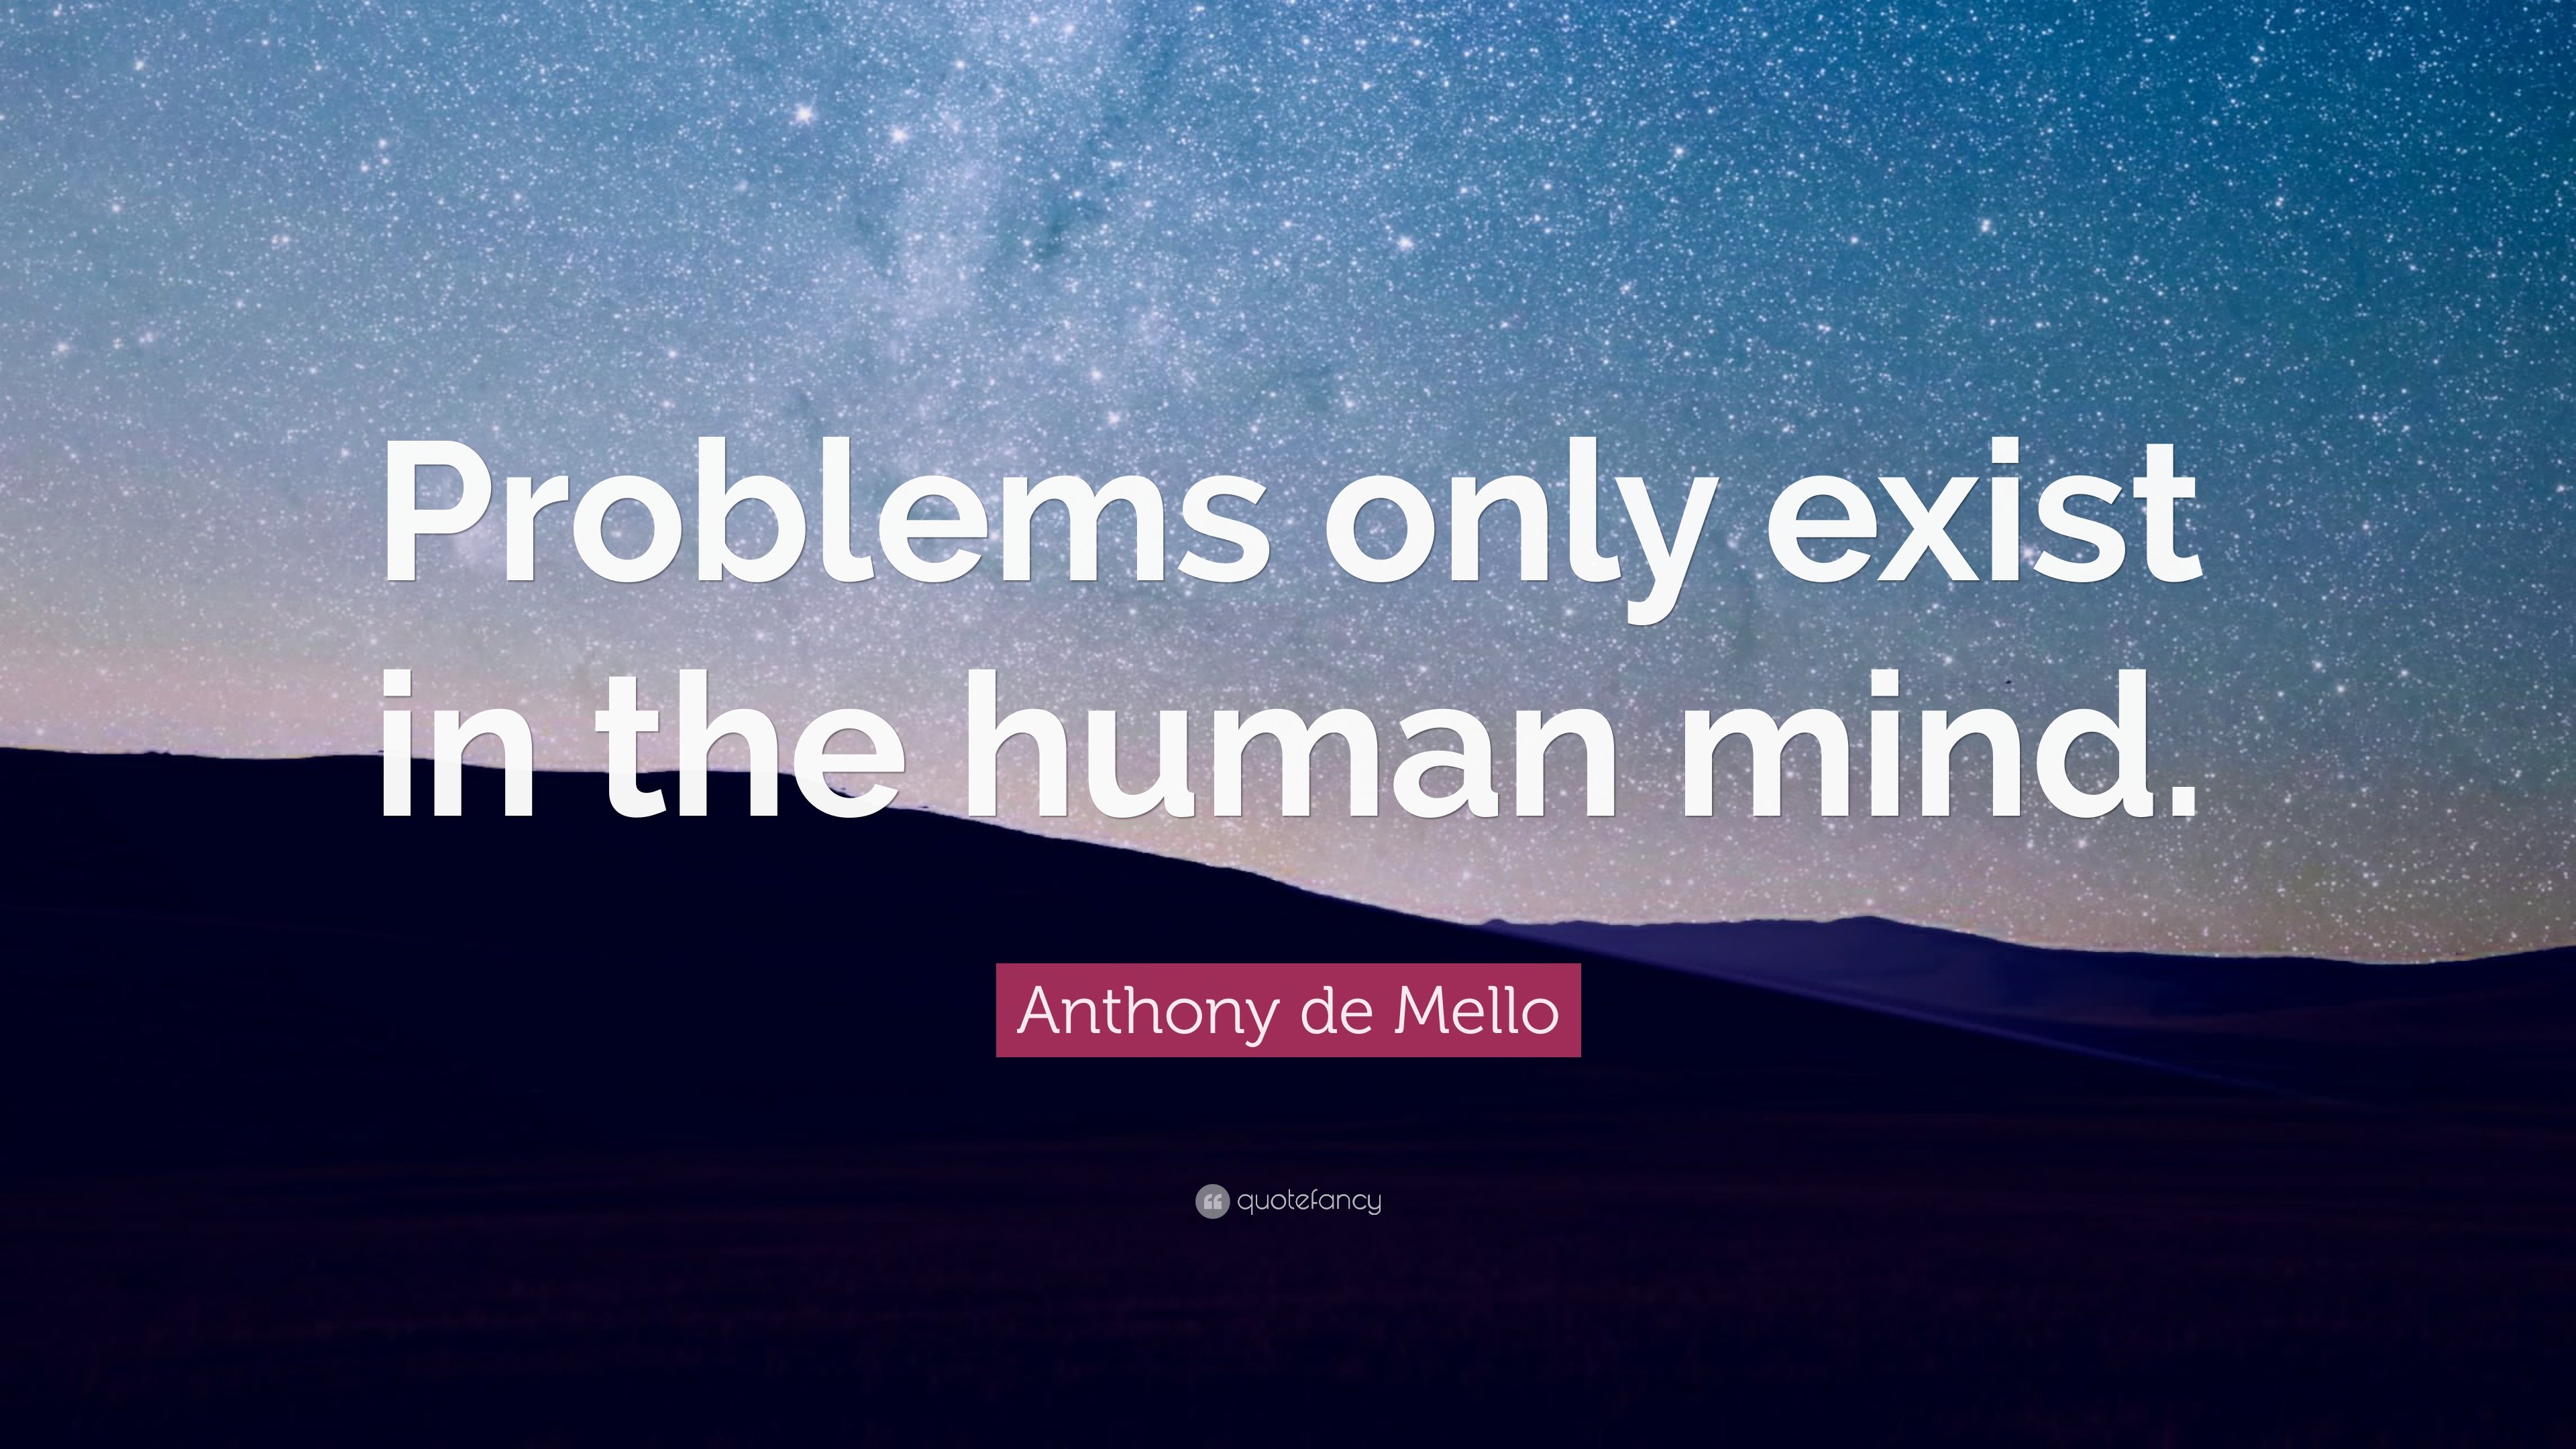 Anthony de Mello Quote: “Problems only exist in the human